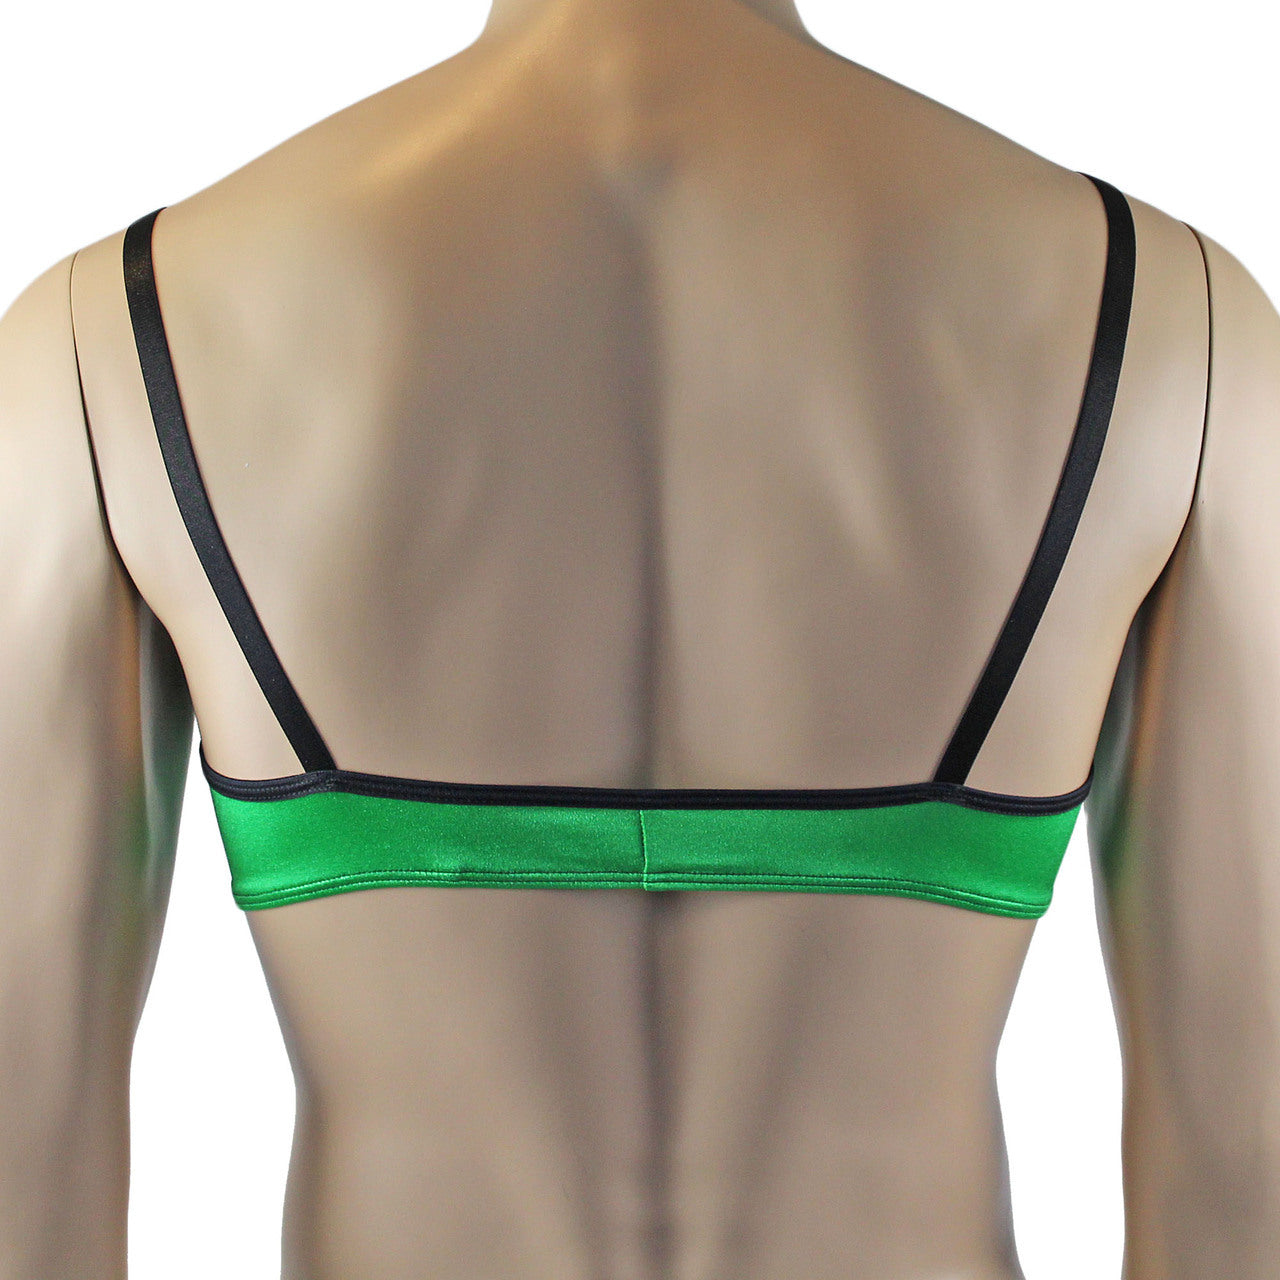 Mens Risque Bra Top and Thong (green and black plus other colours)